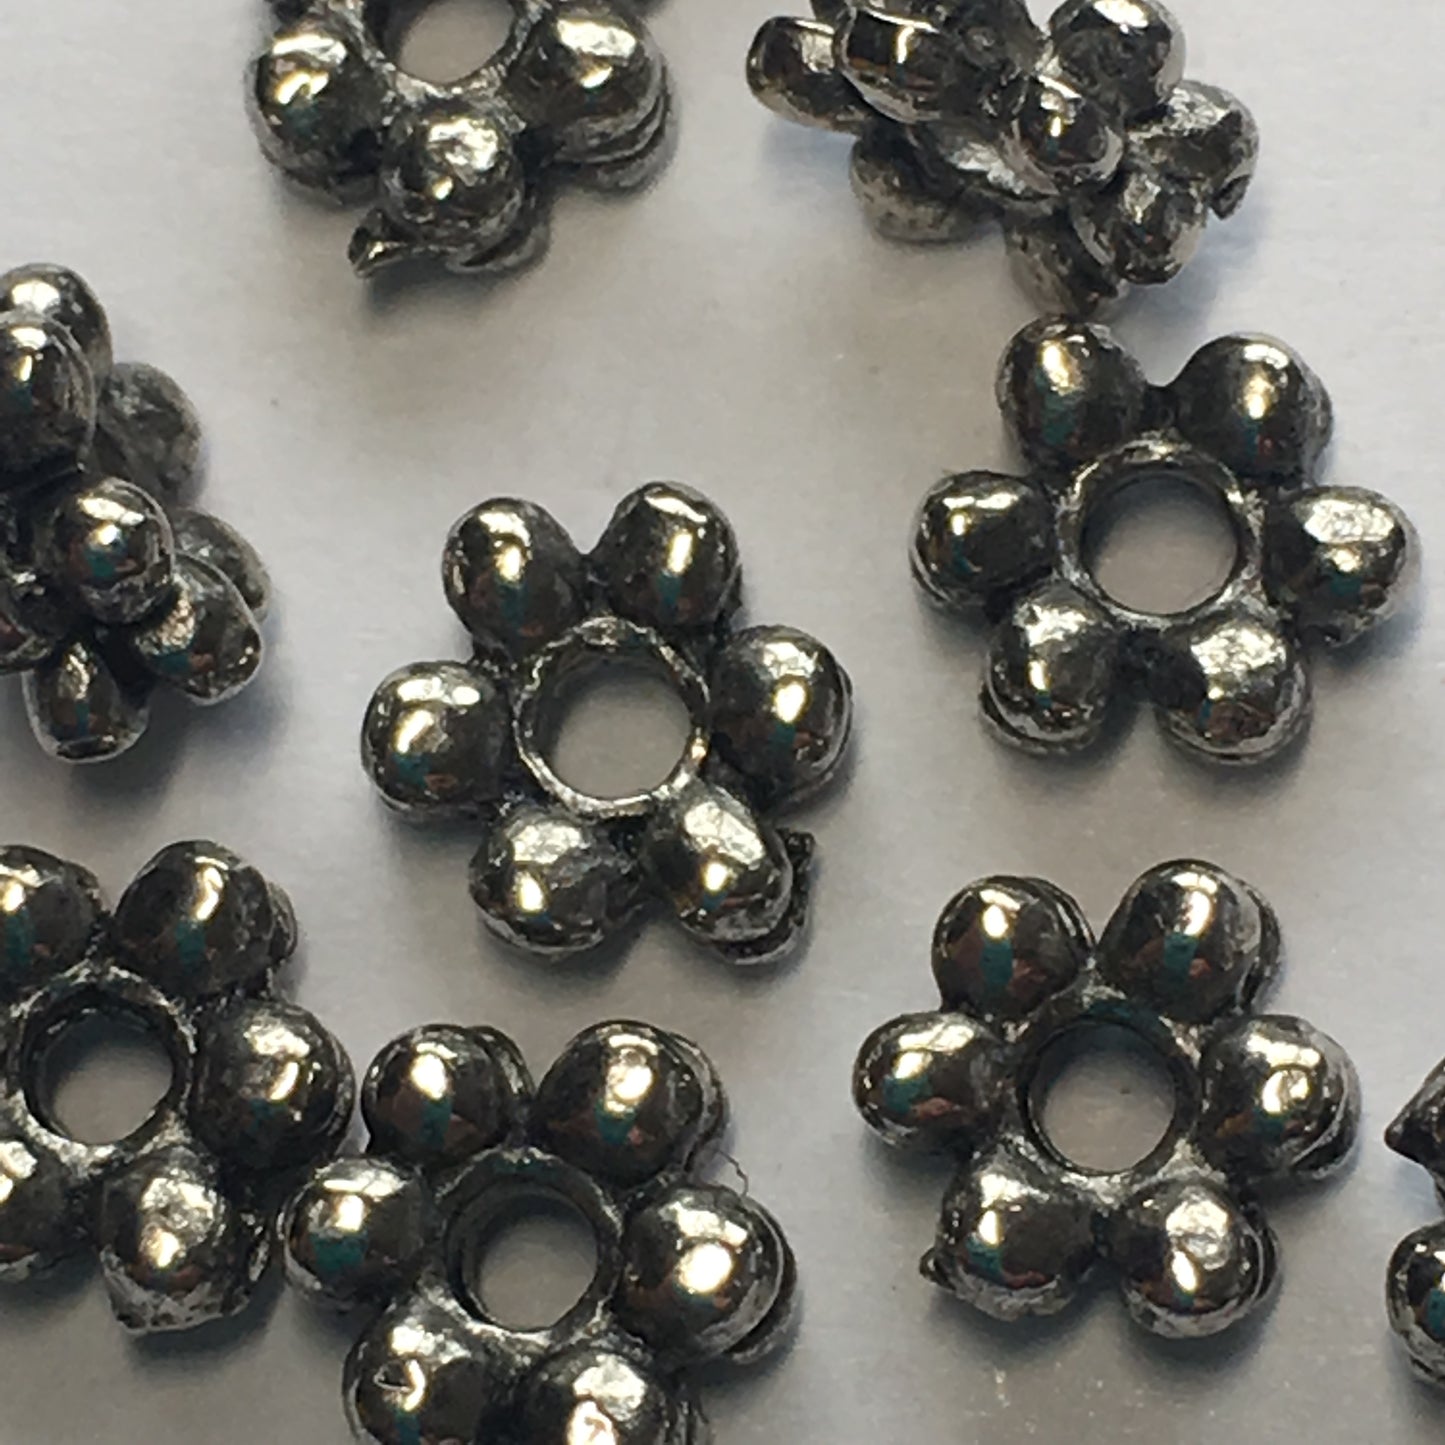 Antique Silver Daisy Spacer Beads, 7 x 2 mm - 12 Beads